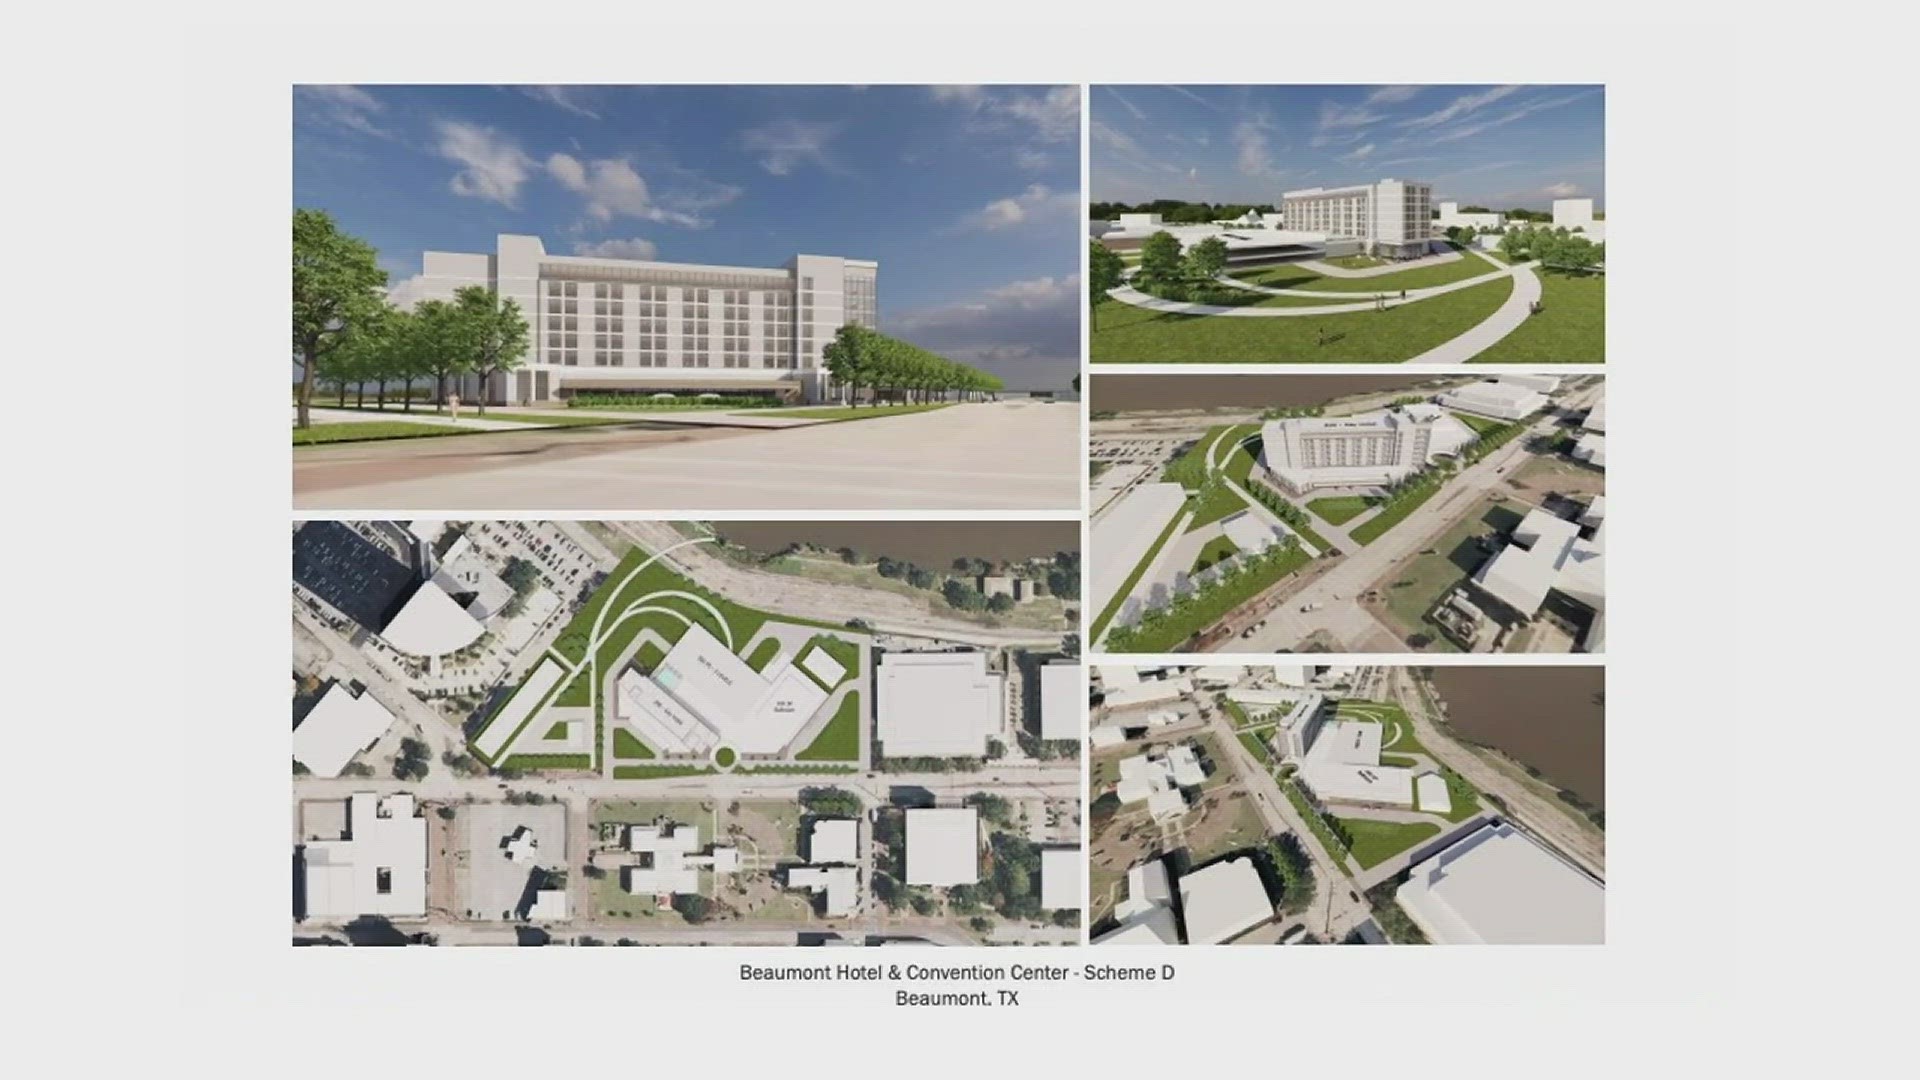 The renderings show the five ideas for a hotel and conference center that would be built in downtown Beaumont.